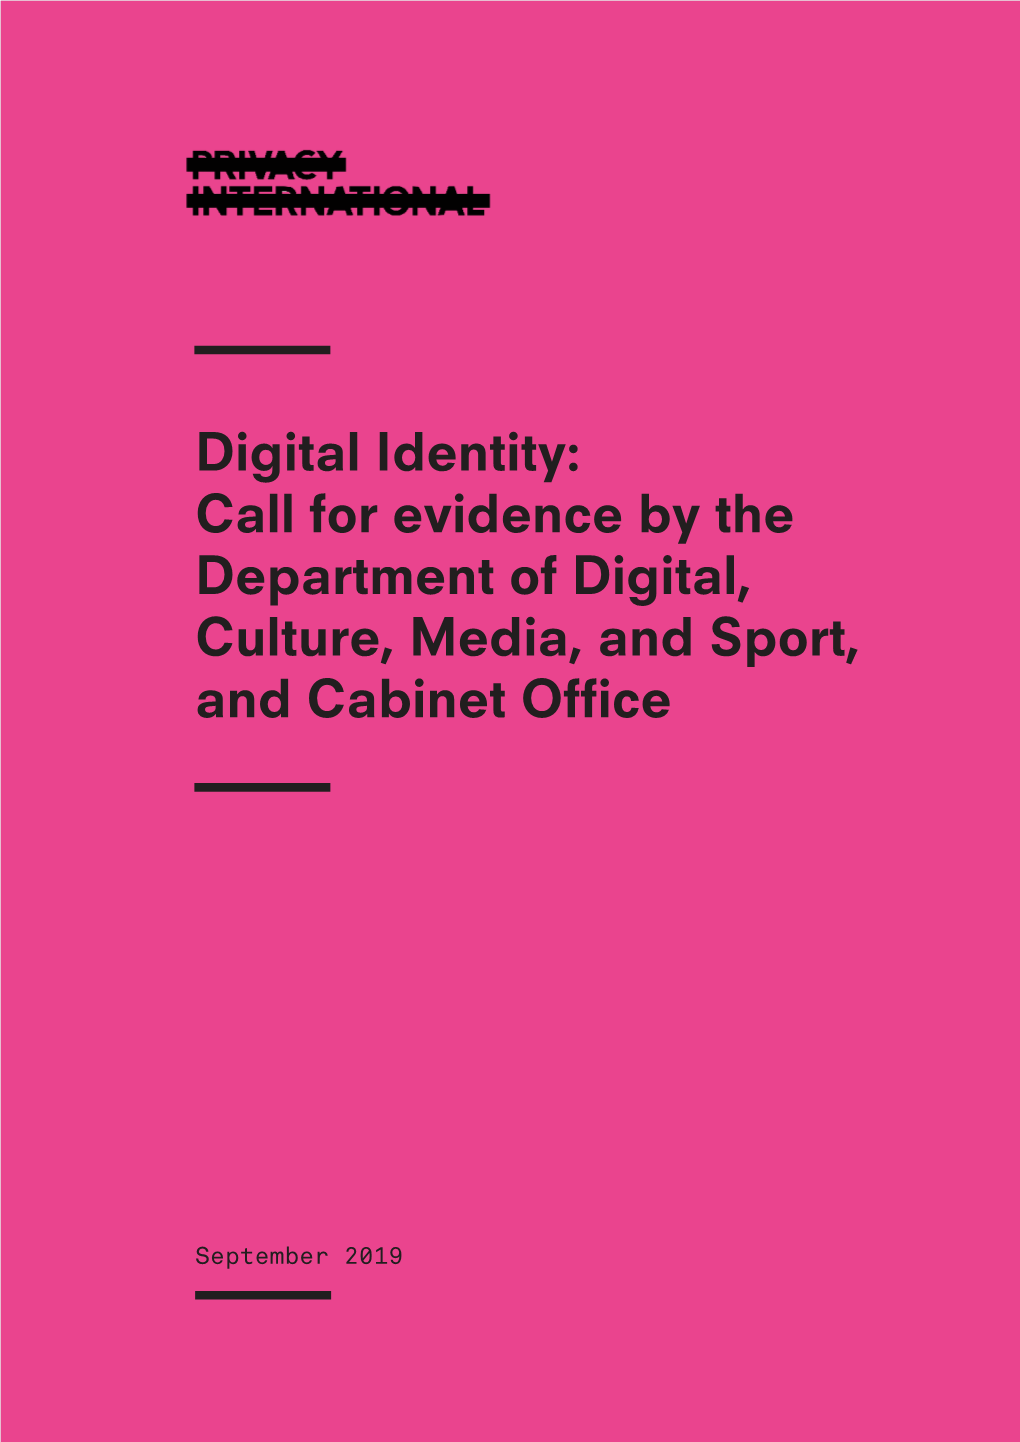 Digital Identity: Call for Evidence by the Department of Digital, Culture, Media, and Sport, and Cabinet Ofﬁce